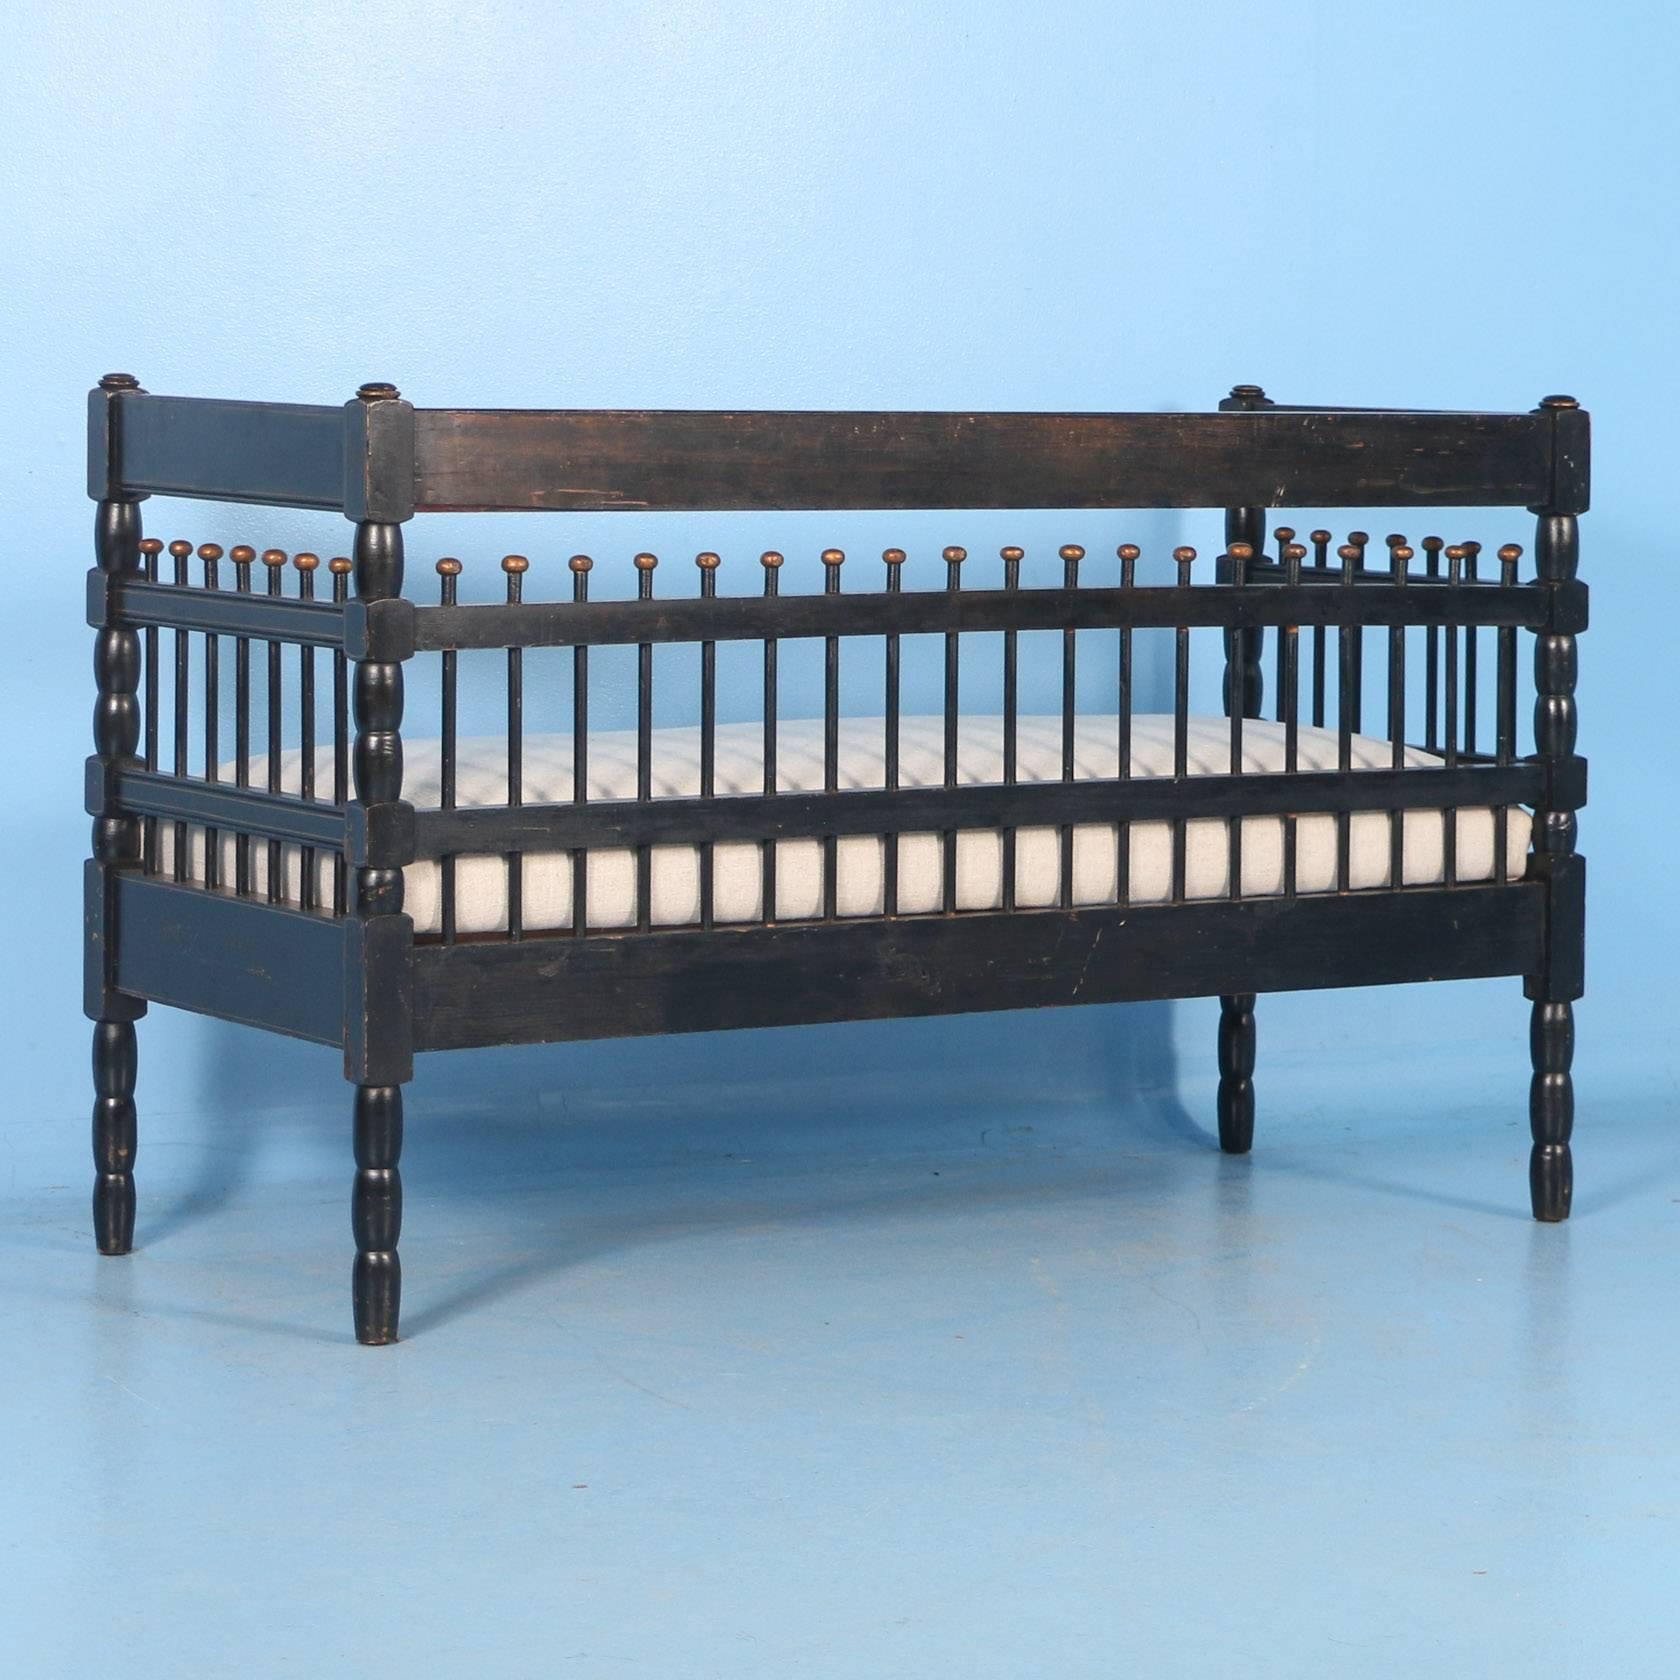 The paint is all original on this black bench with gold trim from Sweden. It was made in the Gustavian Style and has an attractive spindle back. The unusual smaller size allows it to be placed in a wide variety of spaces. The seat was recently